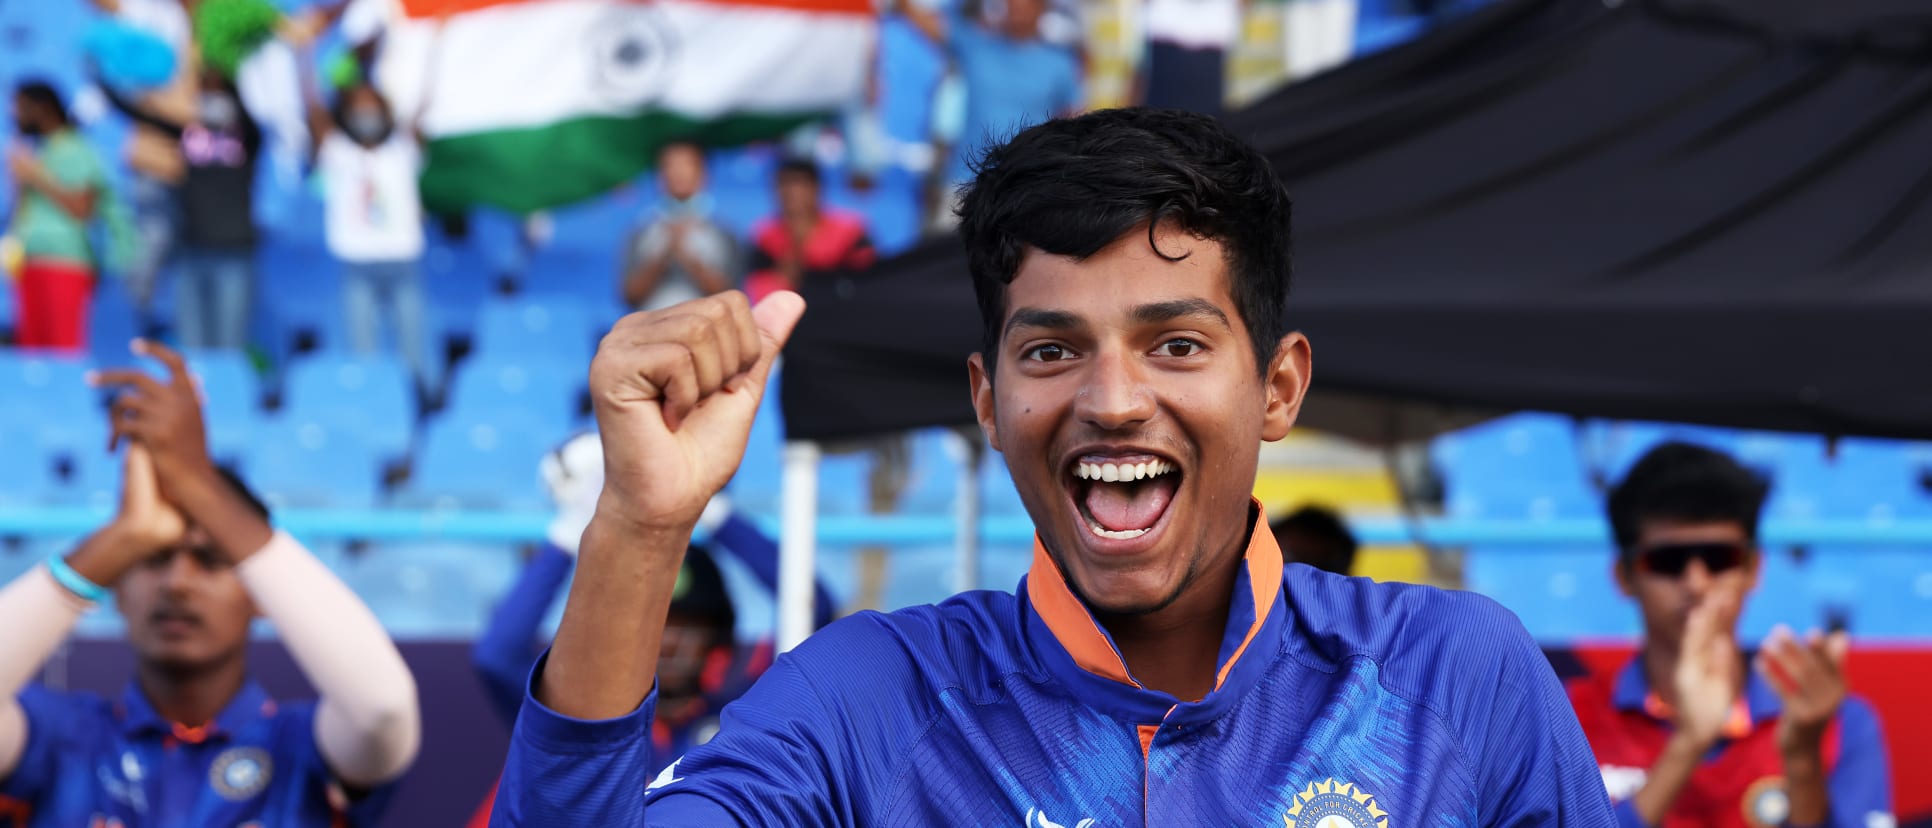 Yash Dhull of India reacts during the ICC U19 Men's Cricket World Cup Final match between England and India at Sir Vivian Richards Stadium on February 05, 2022 in Antigua, Antigua and Barbuda.